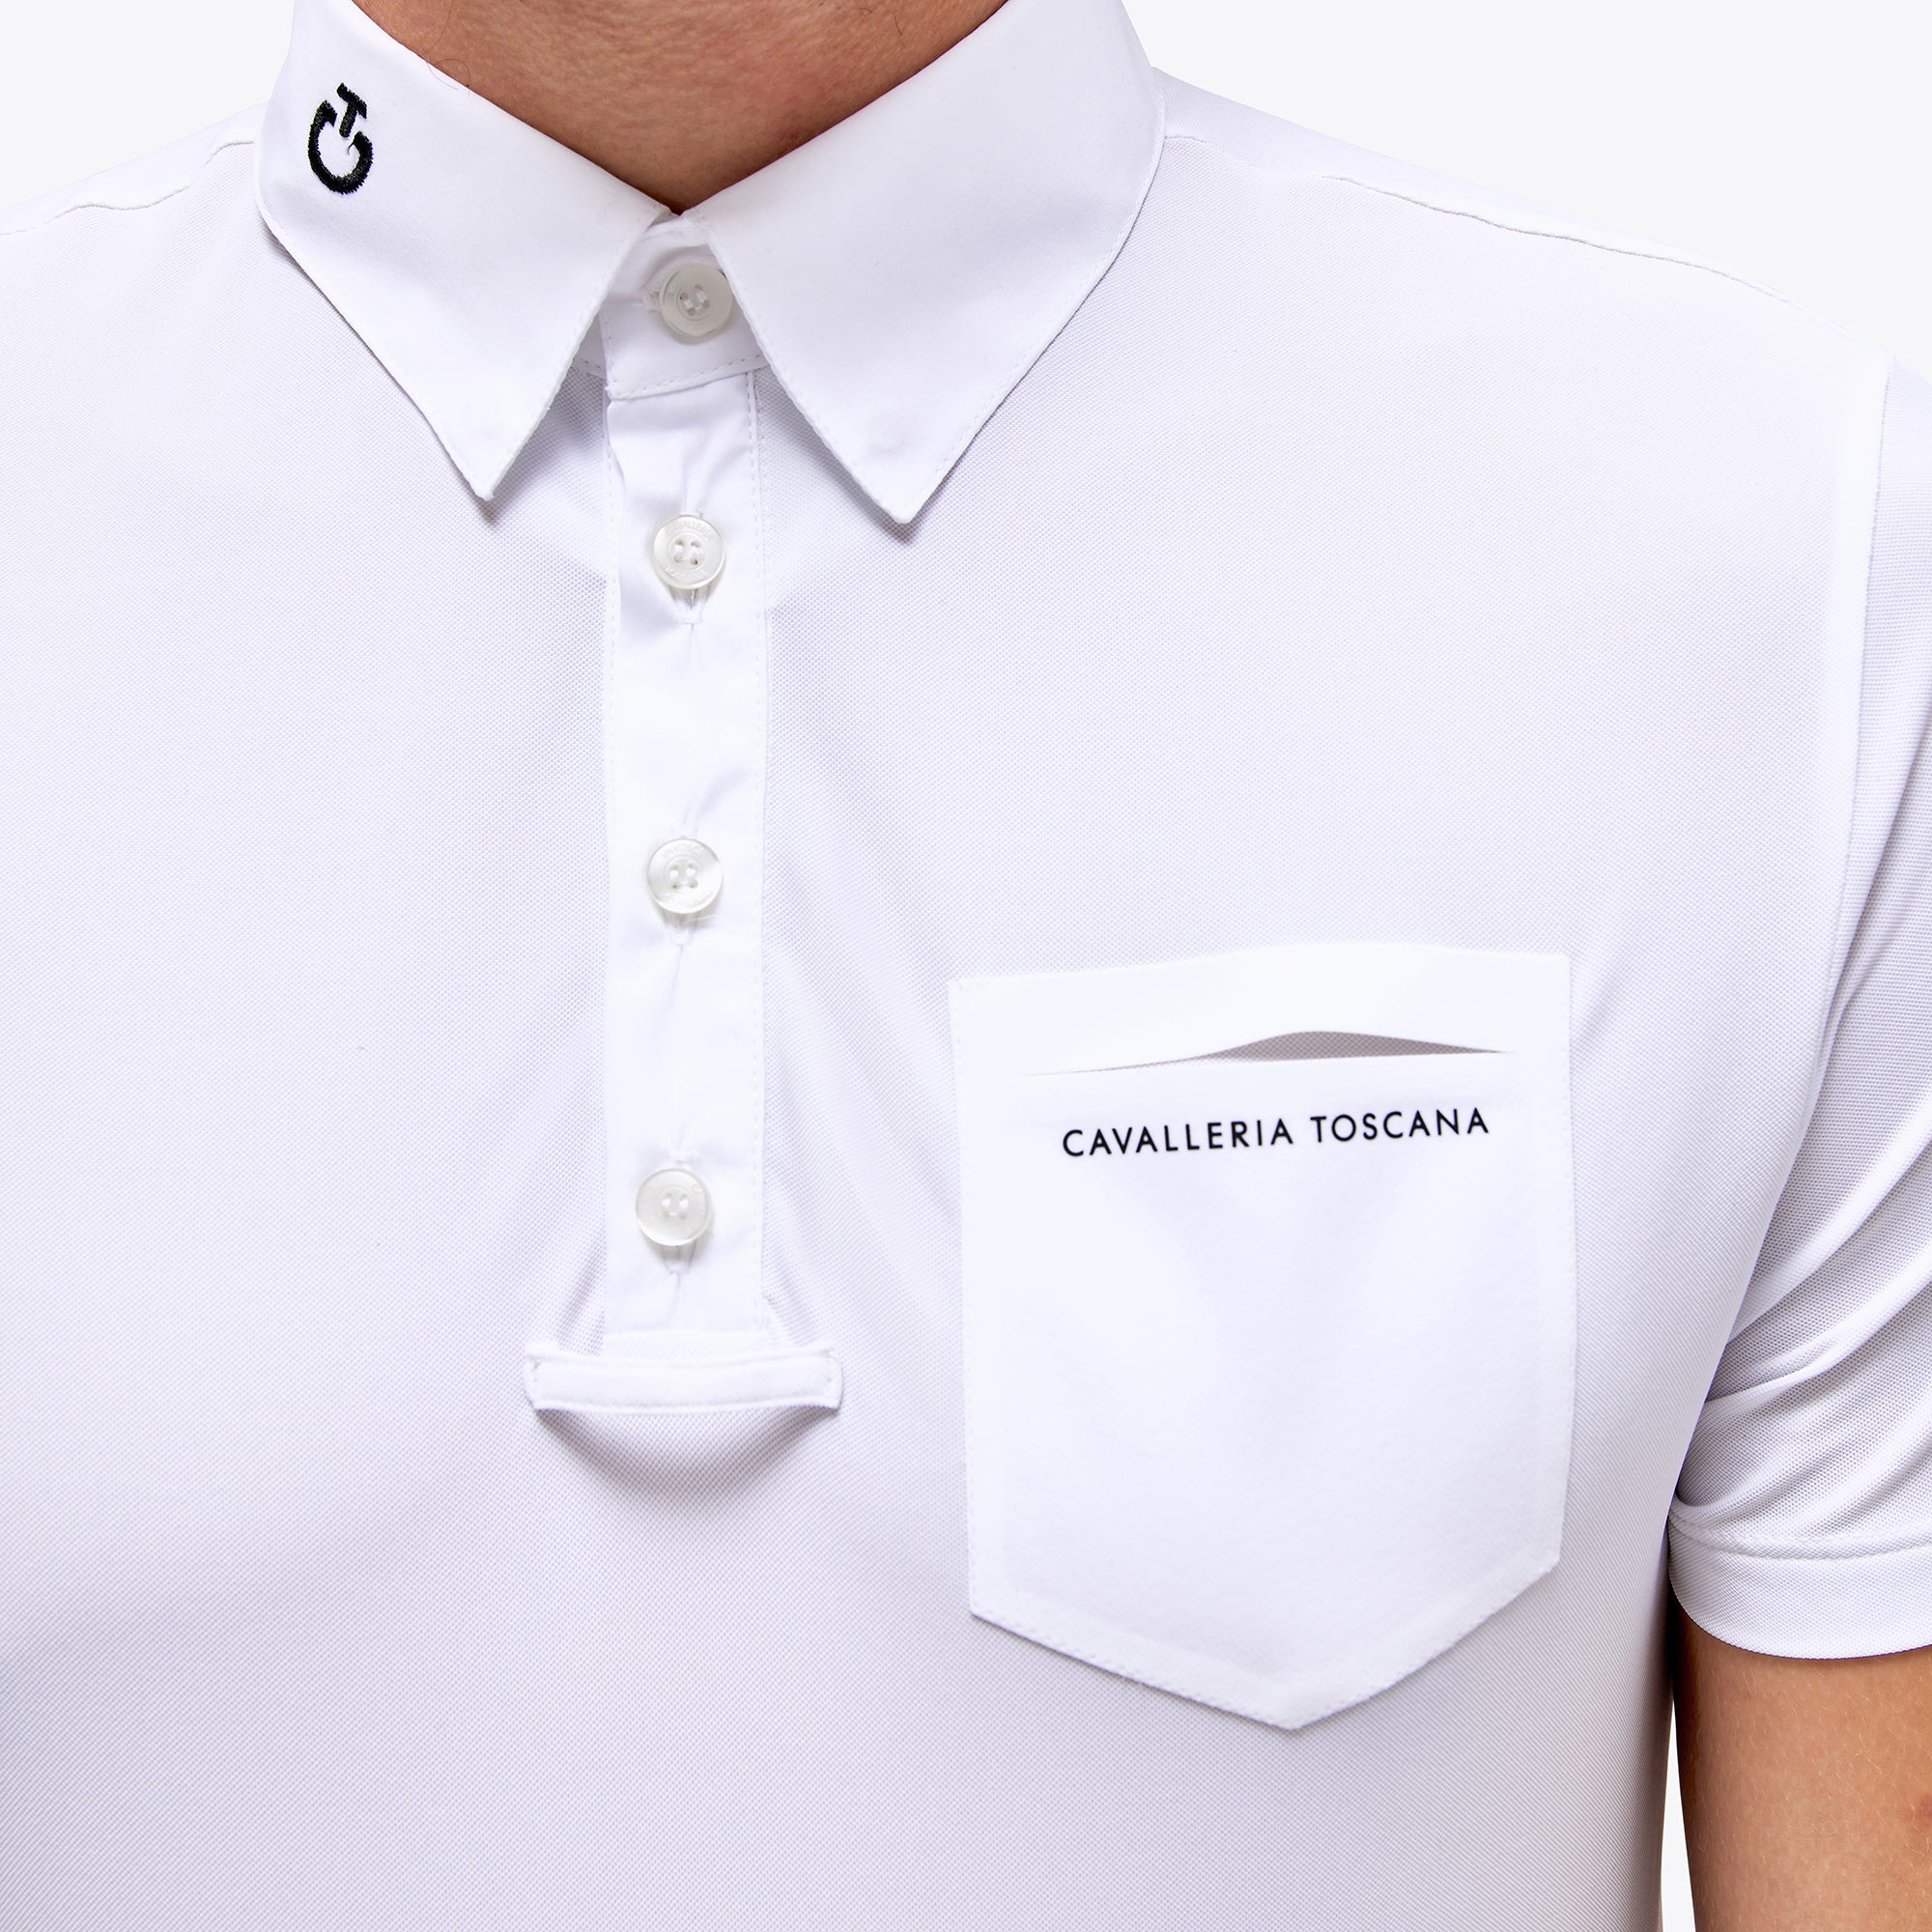 Men's Show Shirt with Buttons - White (LAST ONE - X-LARGE)